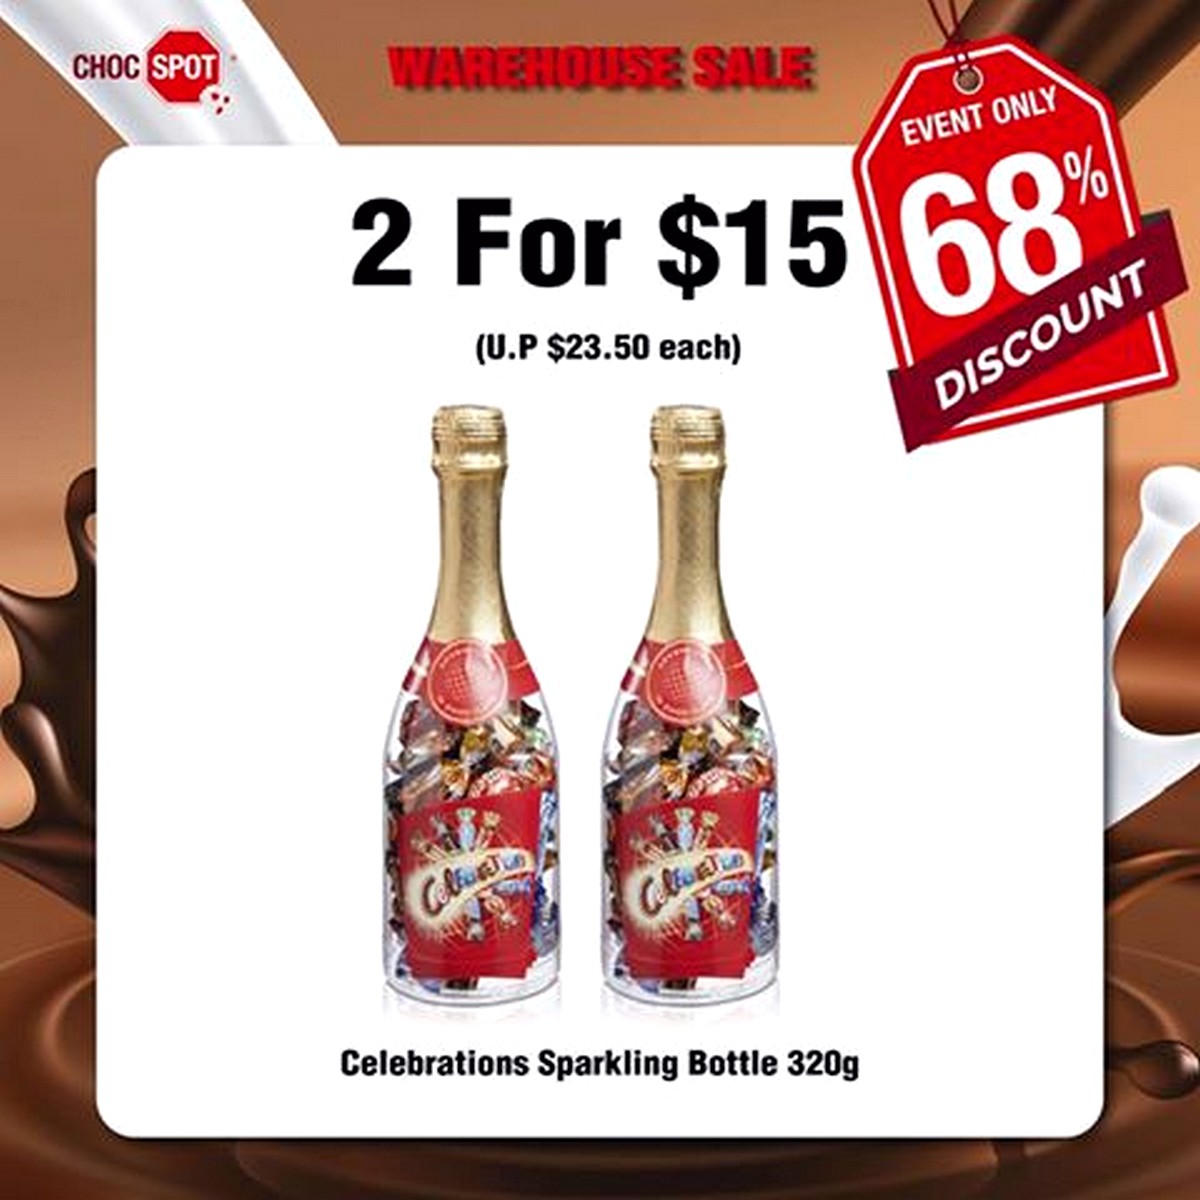 Choc-Spot-Warehouse-Sale-Highlights-004 24 Jul-2 Aug 2020: Choc Spot Warehouse Sale! Up to 80% off Chocolates, Sweets, Chips, Biscuits!